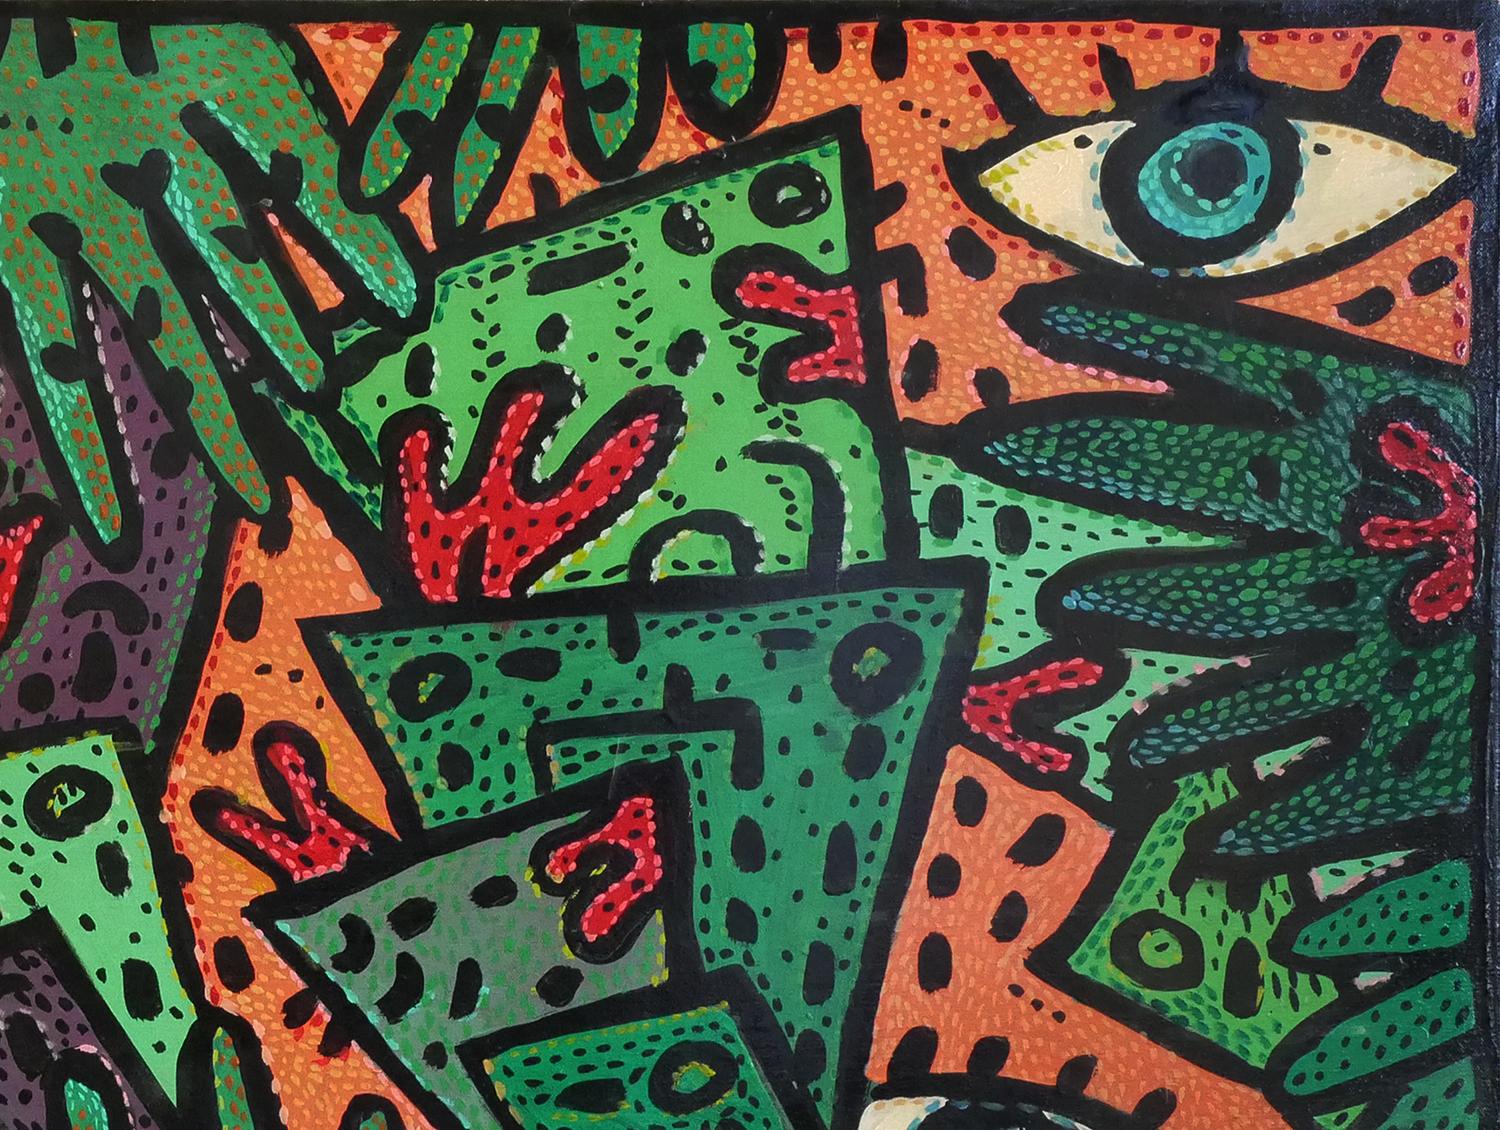 “Bloody Money?” Orange, Green, and Brown Abstract Contemporary Painting - Black Abstract Painting by Richard Fluhr